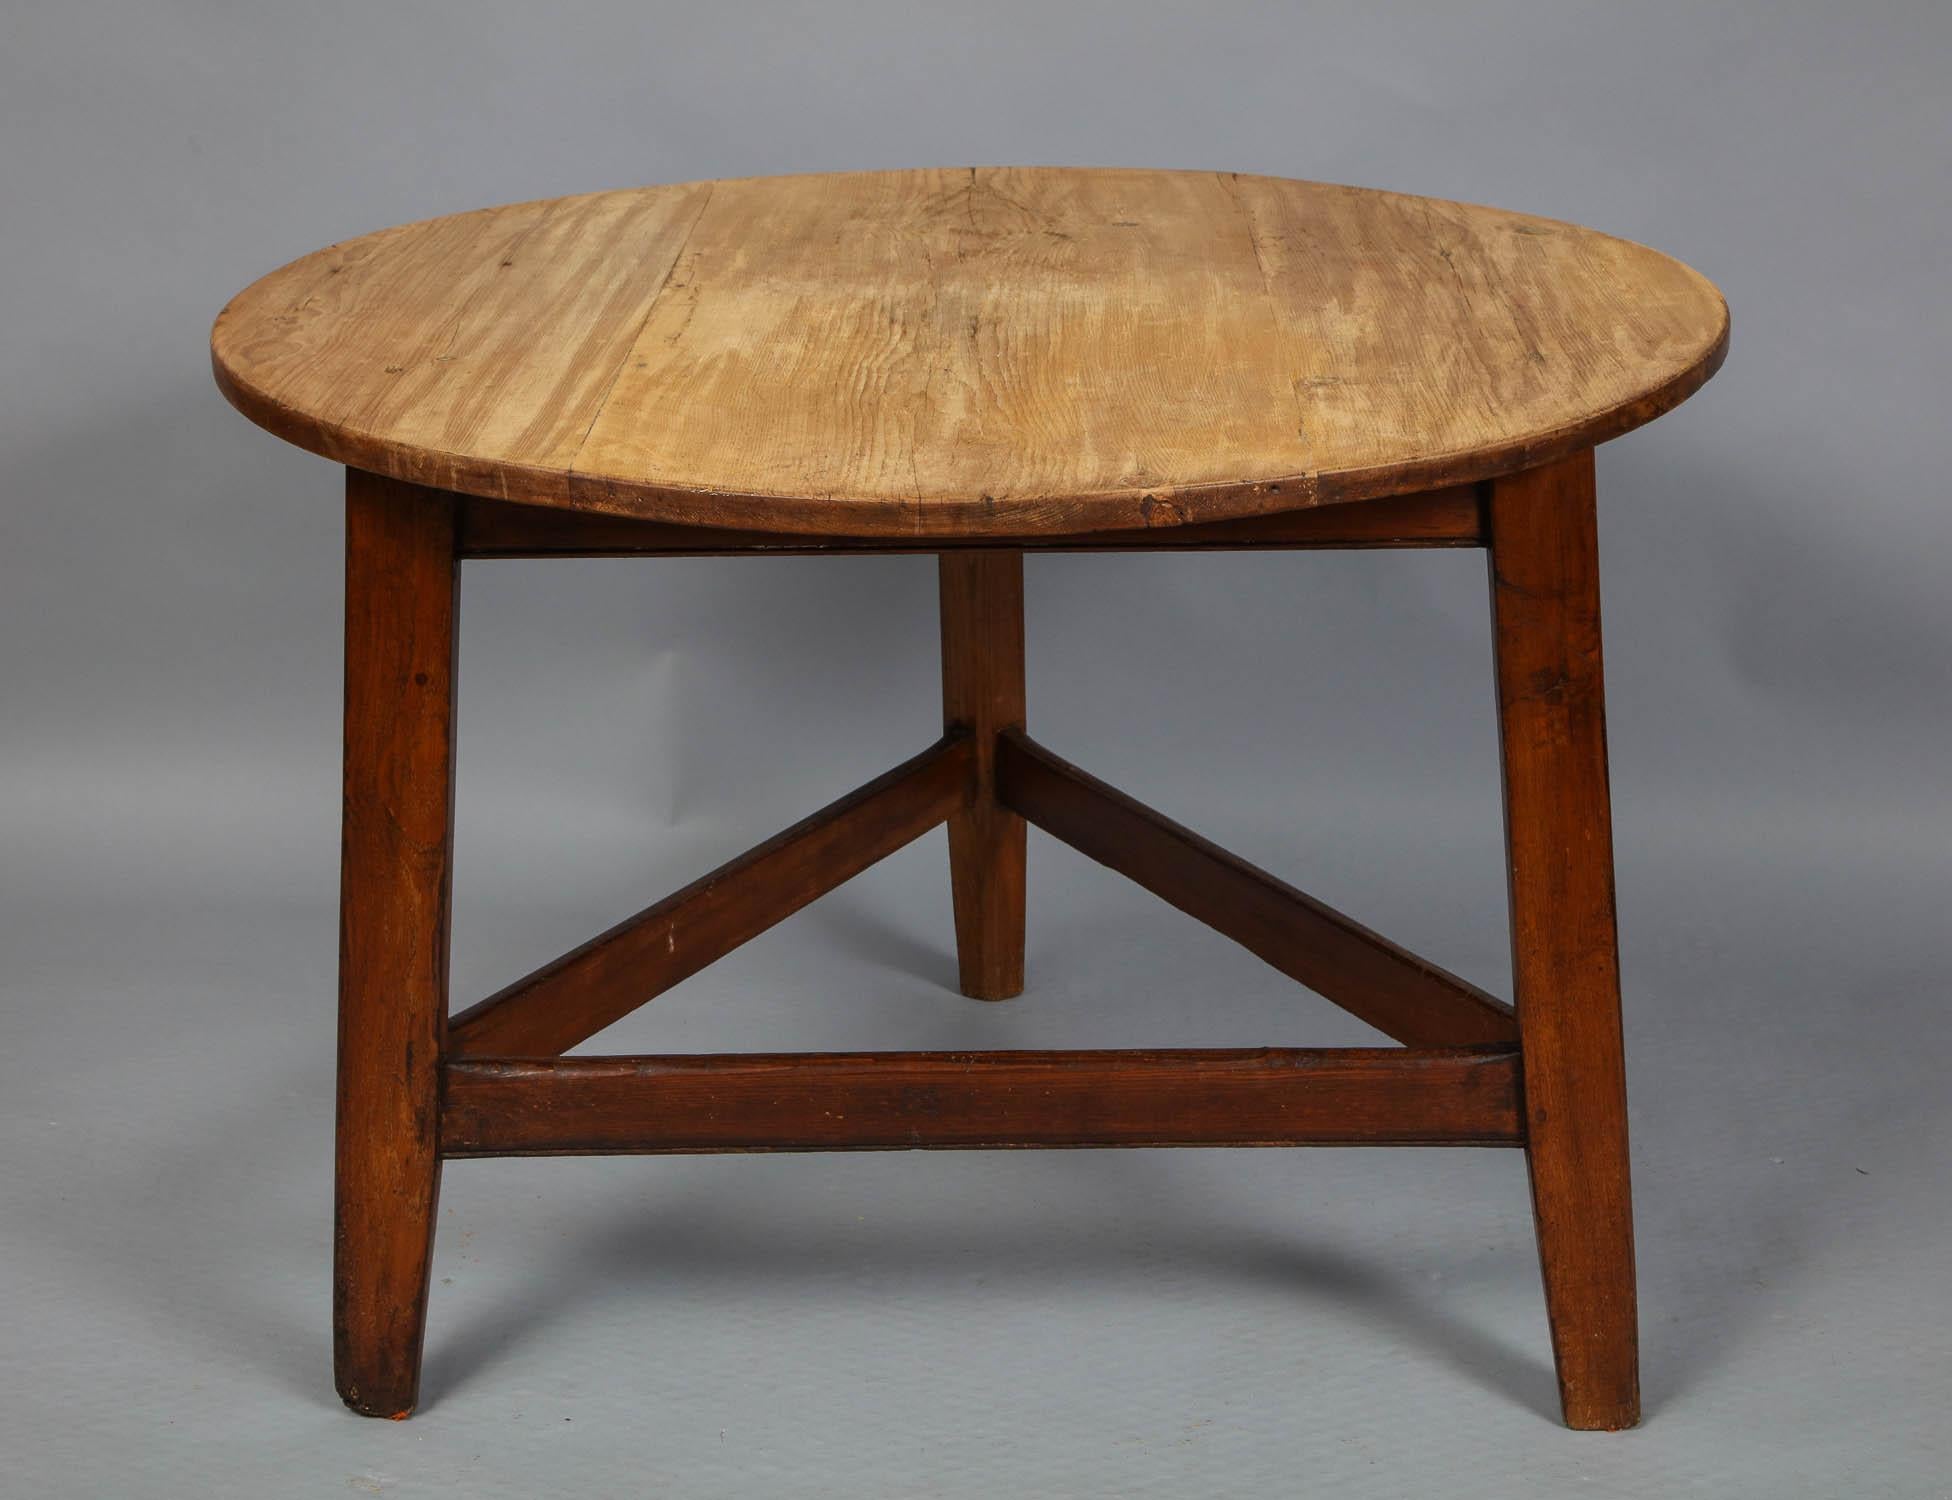 Unusual English or Welsh cricket table having a single board pine top over oak base having splayed tapered legs joined by box stretcher and retaining traces of original red wash, the top with lovely scrubbed surface. This cricket table is larger